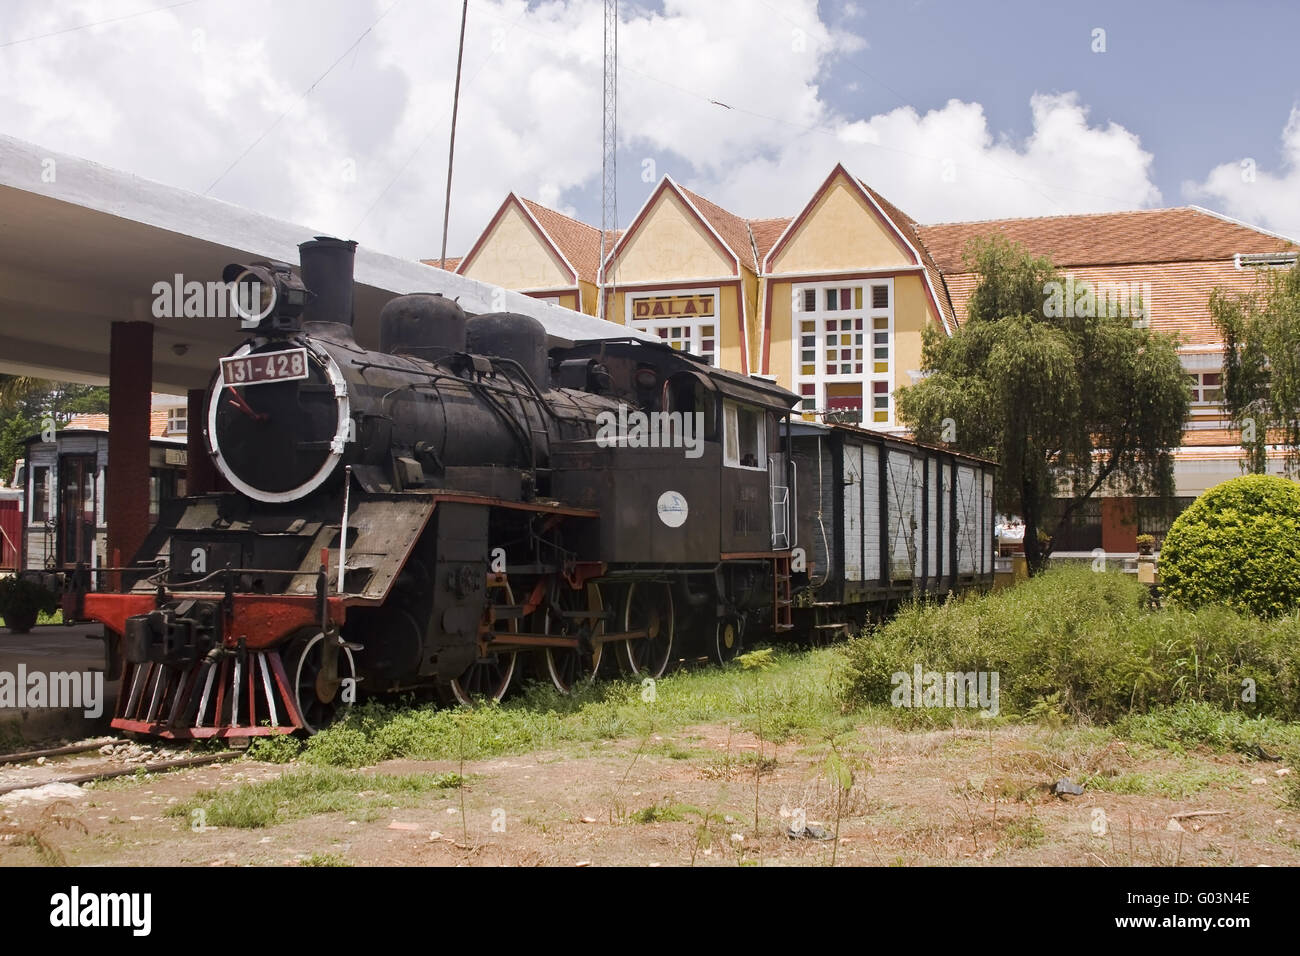 Old steam engine in old trainstation Dalat, Vietna Stock Photo